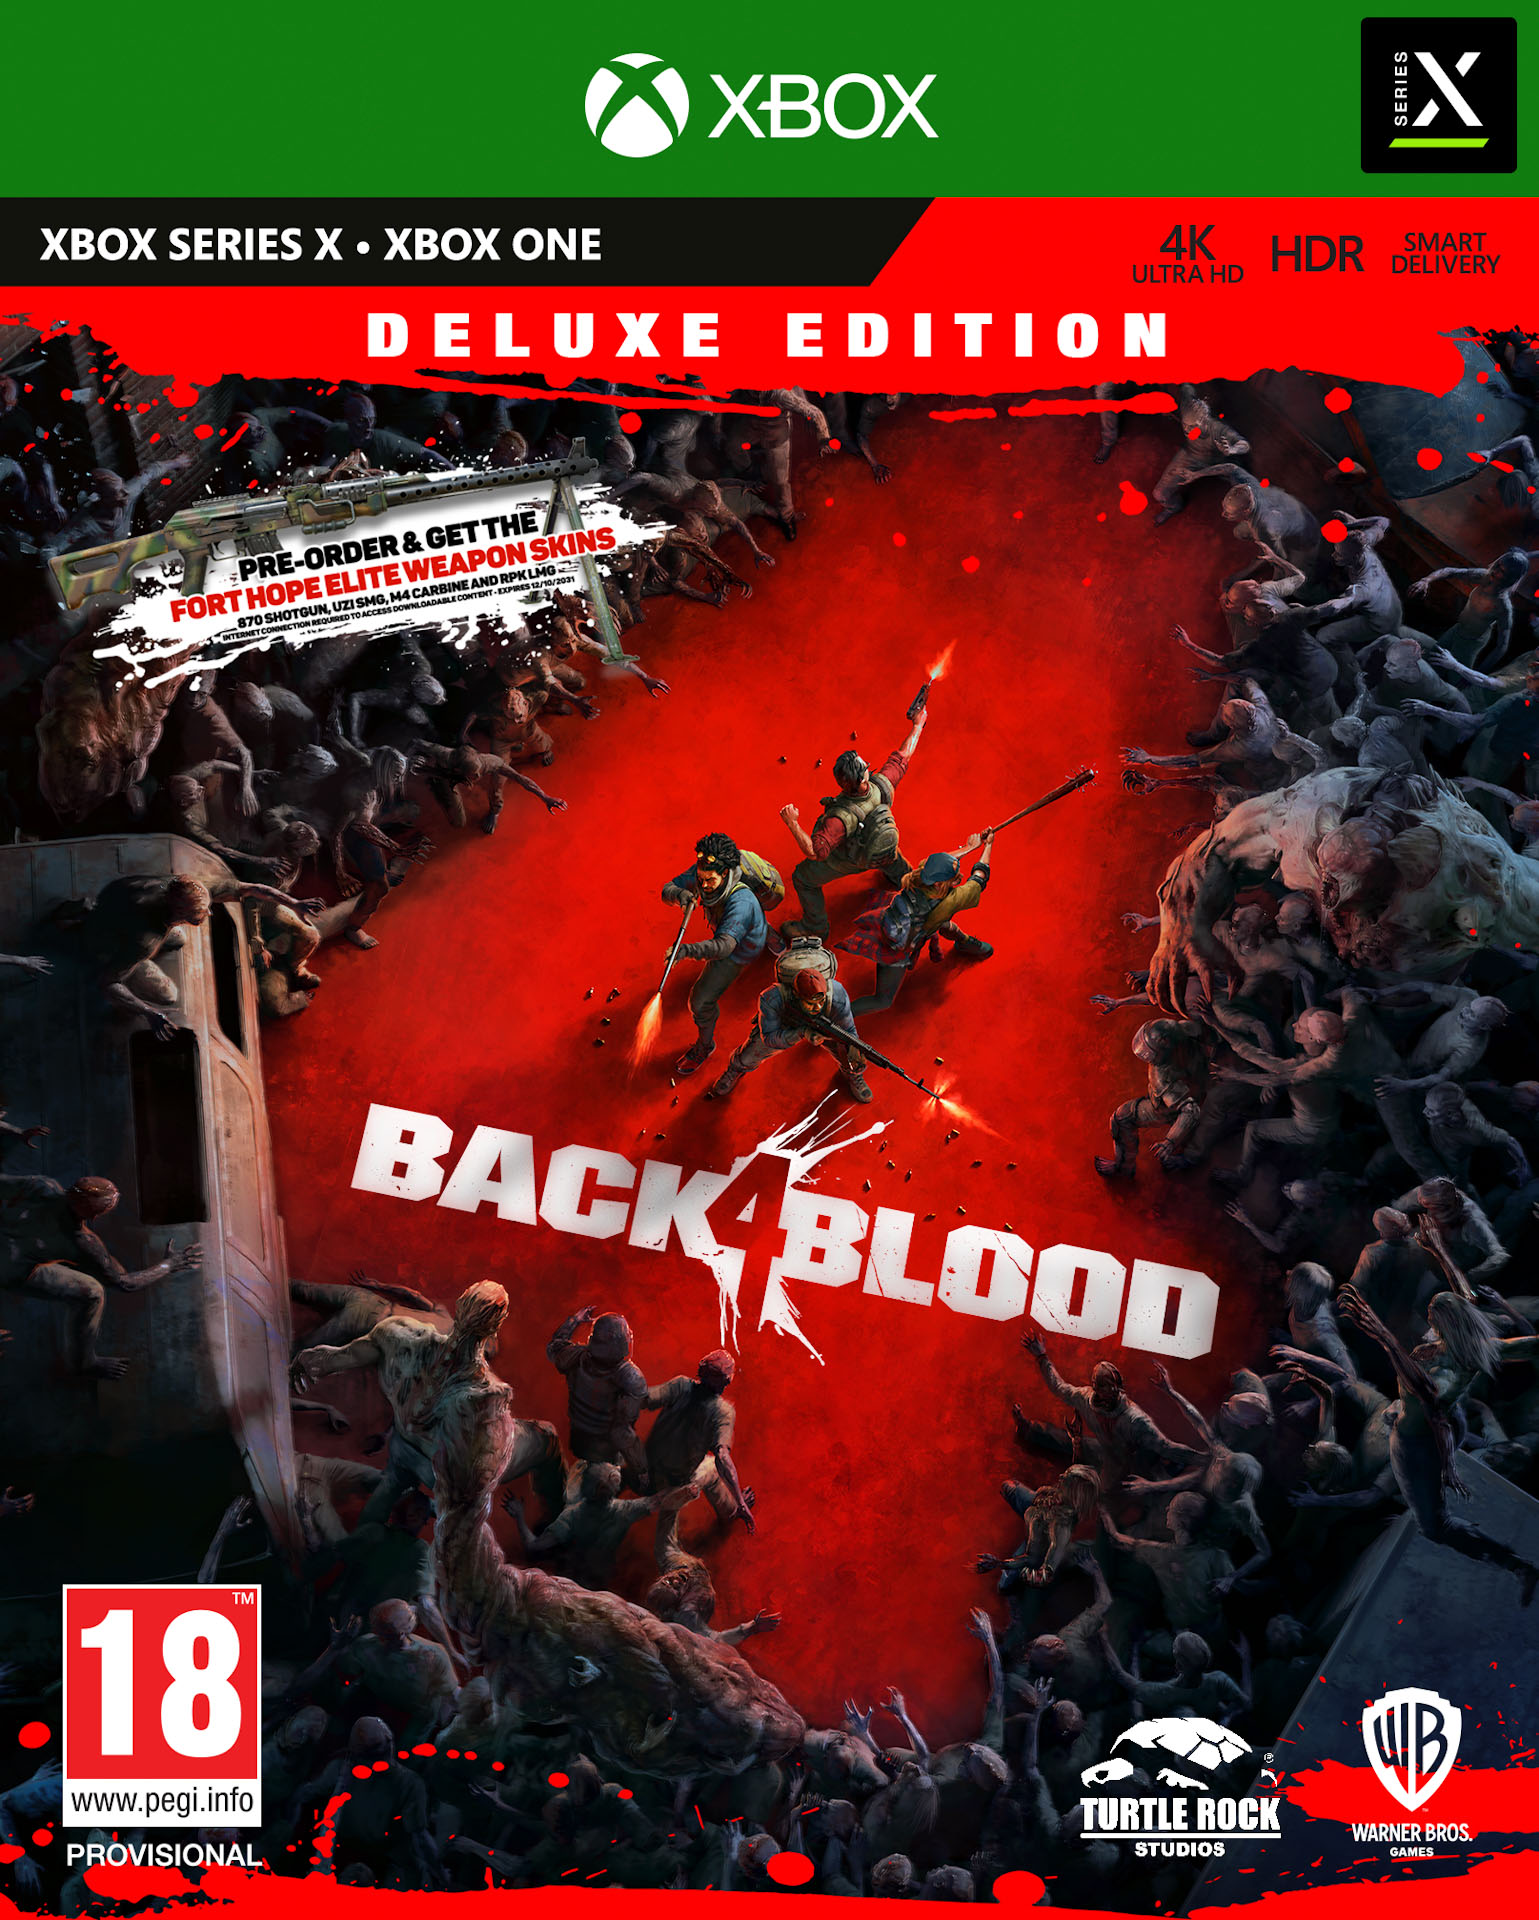 Back 4 Blood Deluxe Edition XSX - Warner 1.19.74.21.030